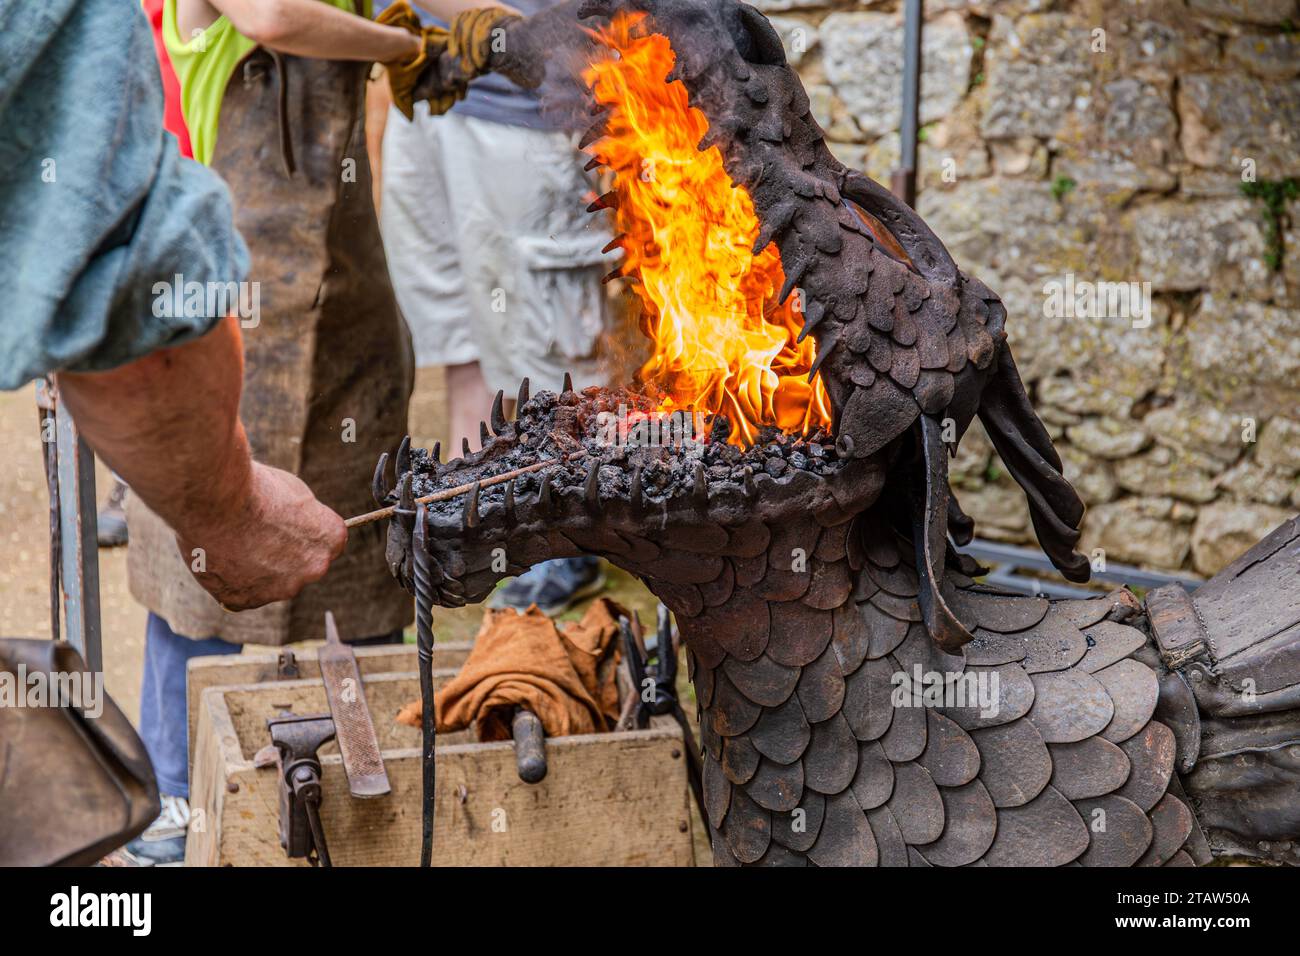 Demonstration of blacksmithing in a dragon head shaped forge during medieval festival in Bonaguil castle, France Stock Photo